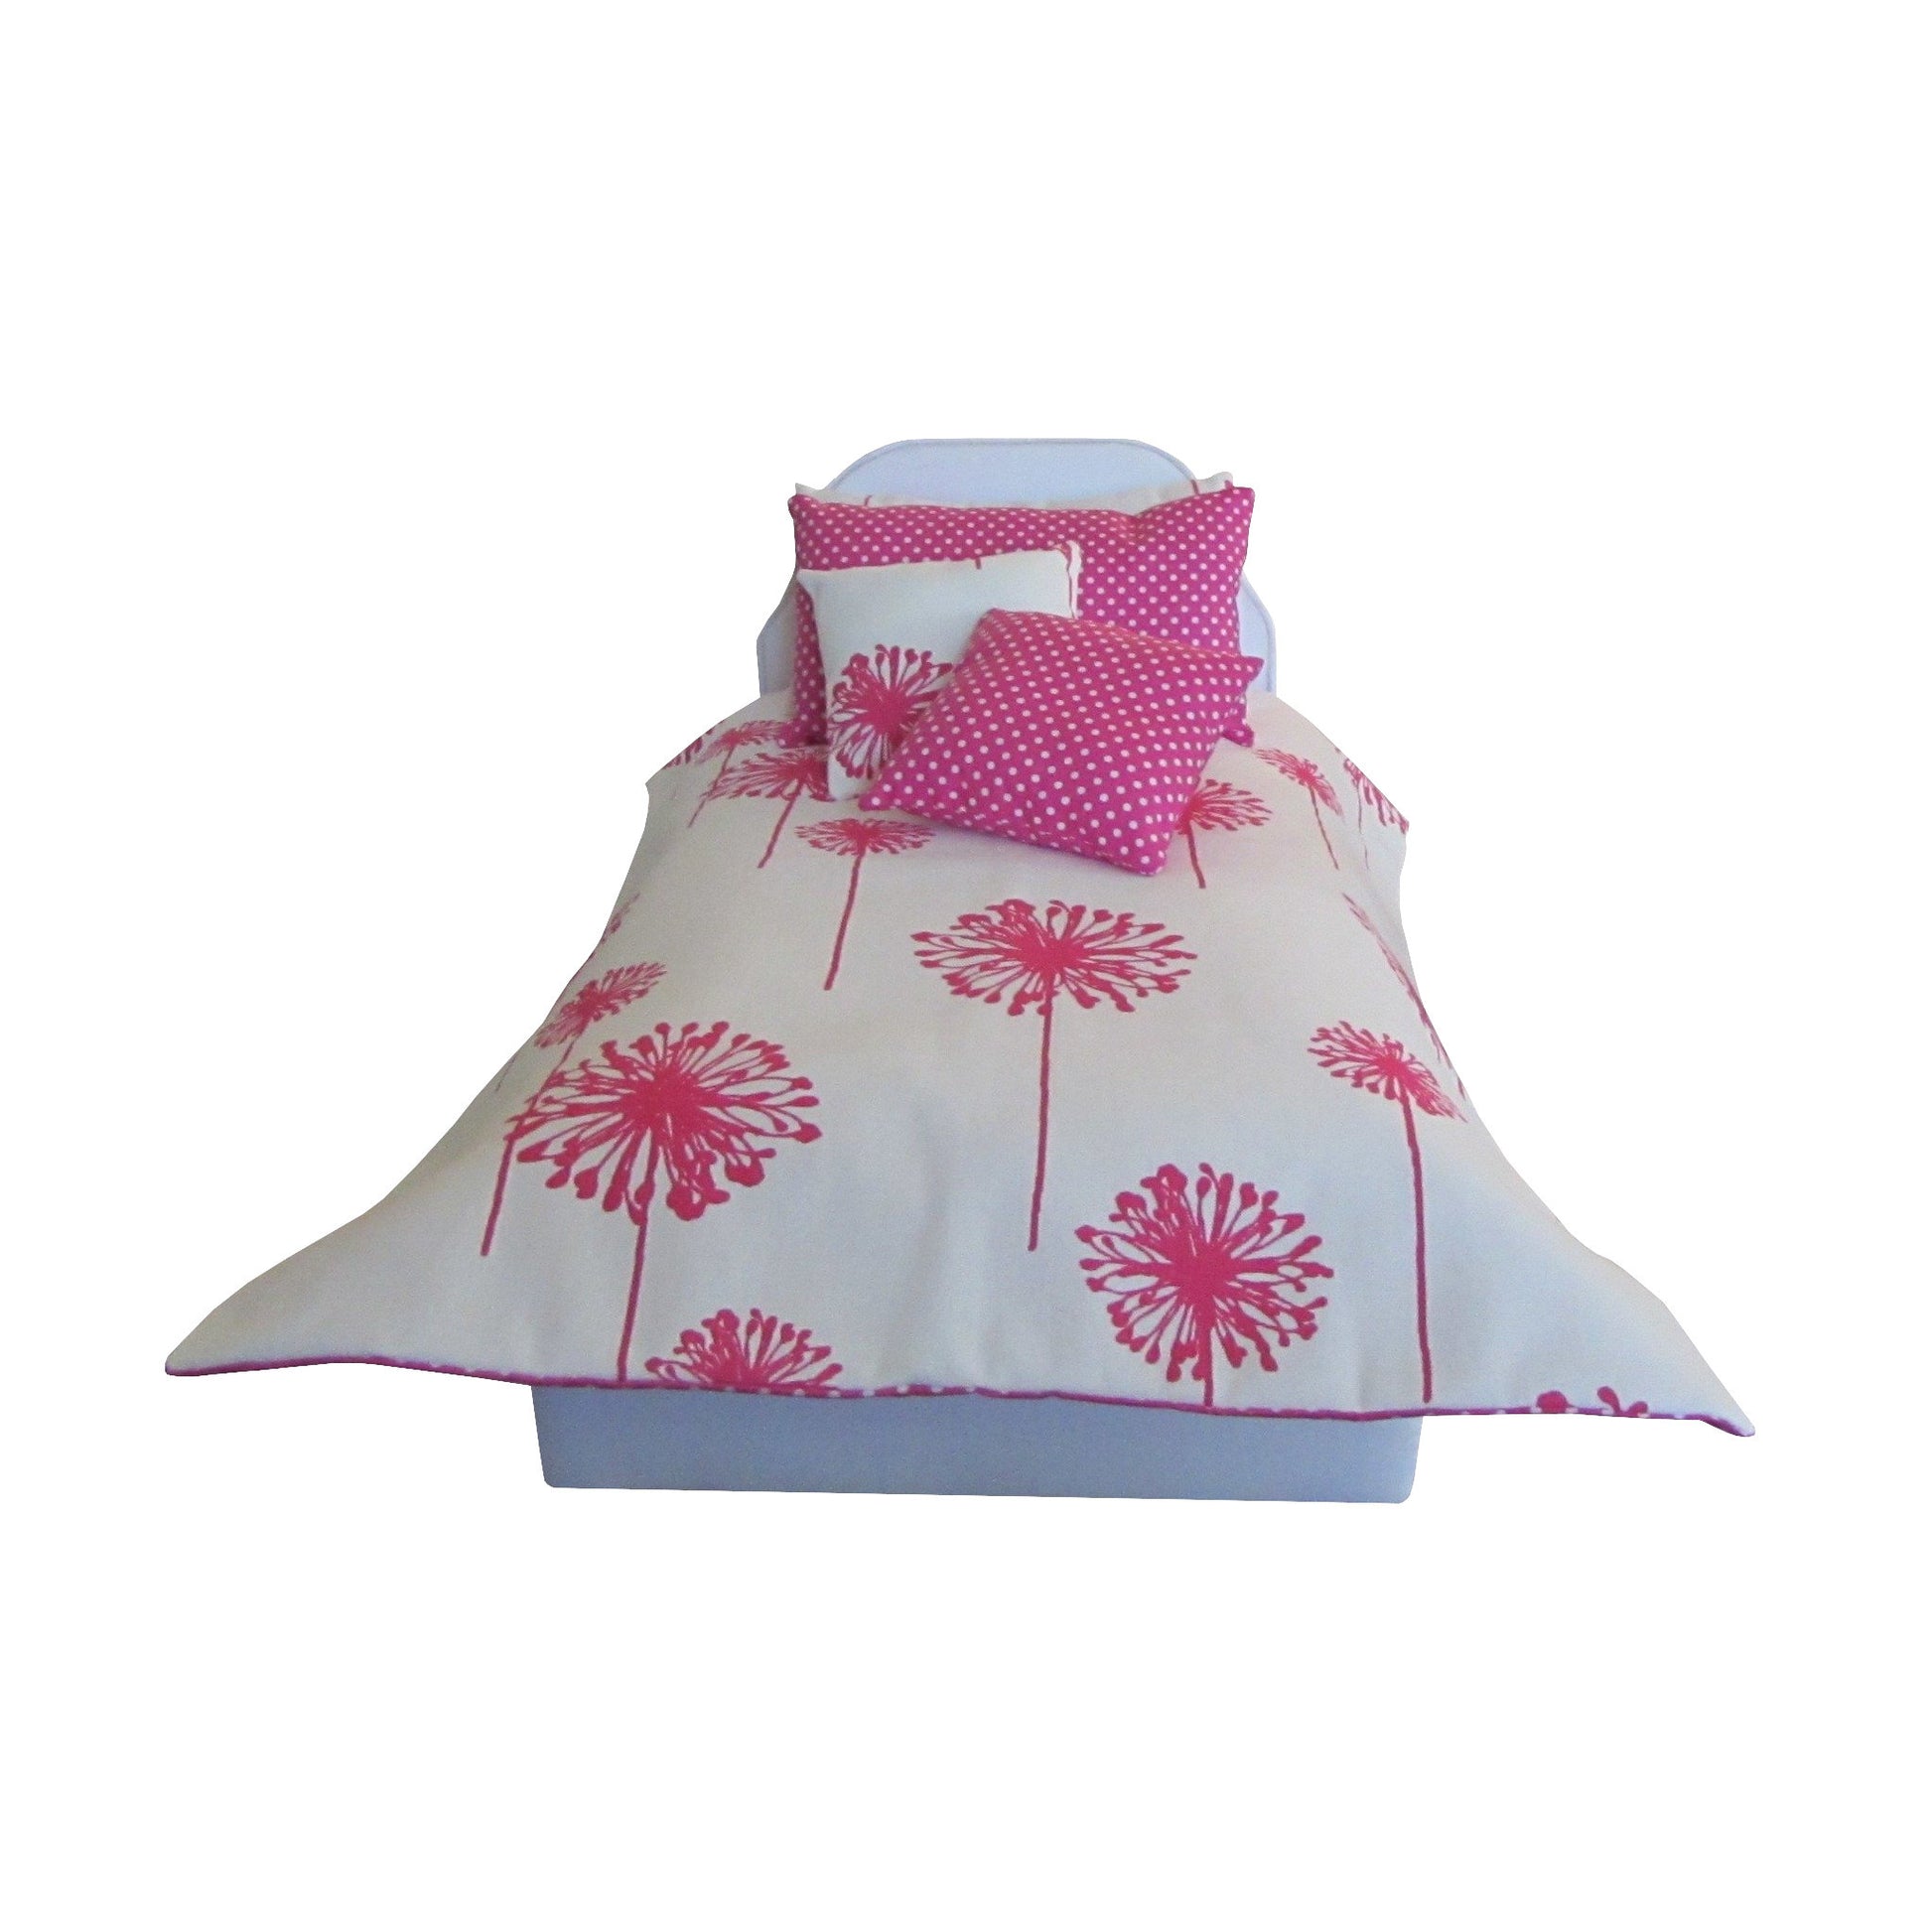 Candy Pink Dandelion Doll Comforter and White Upholstered Doll Bed for 18-inch dolls